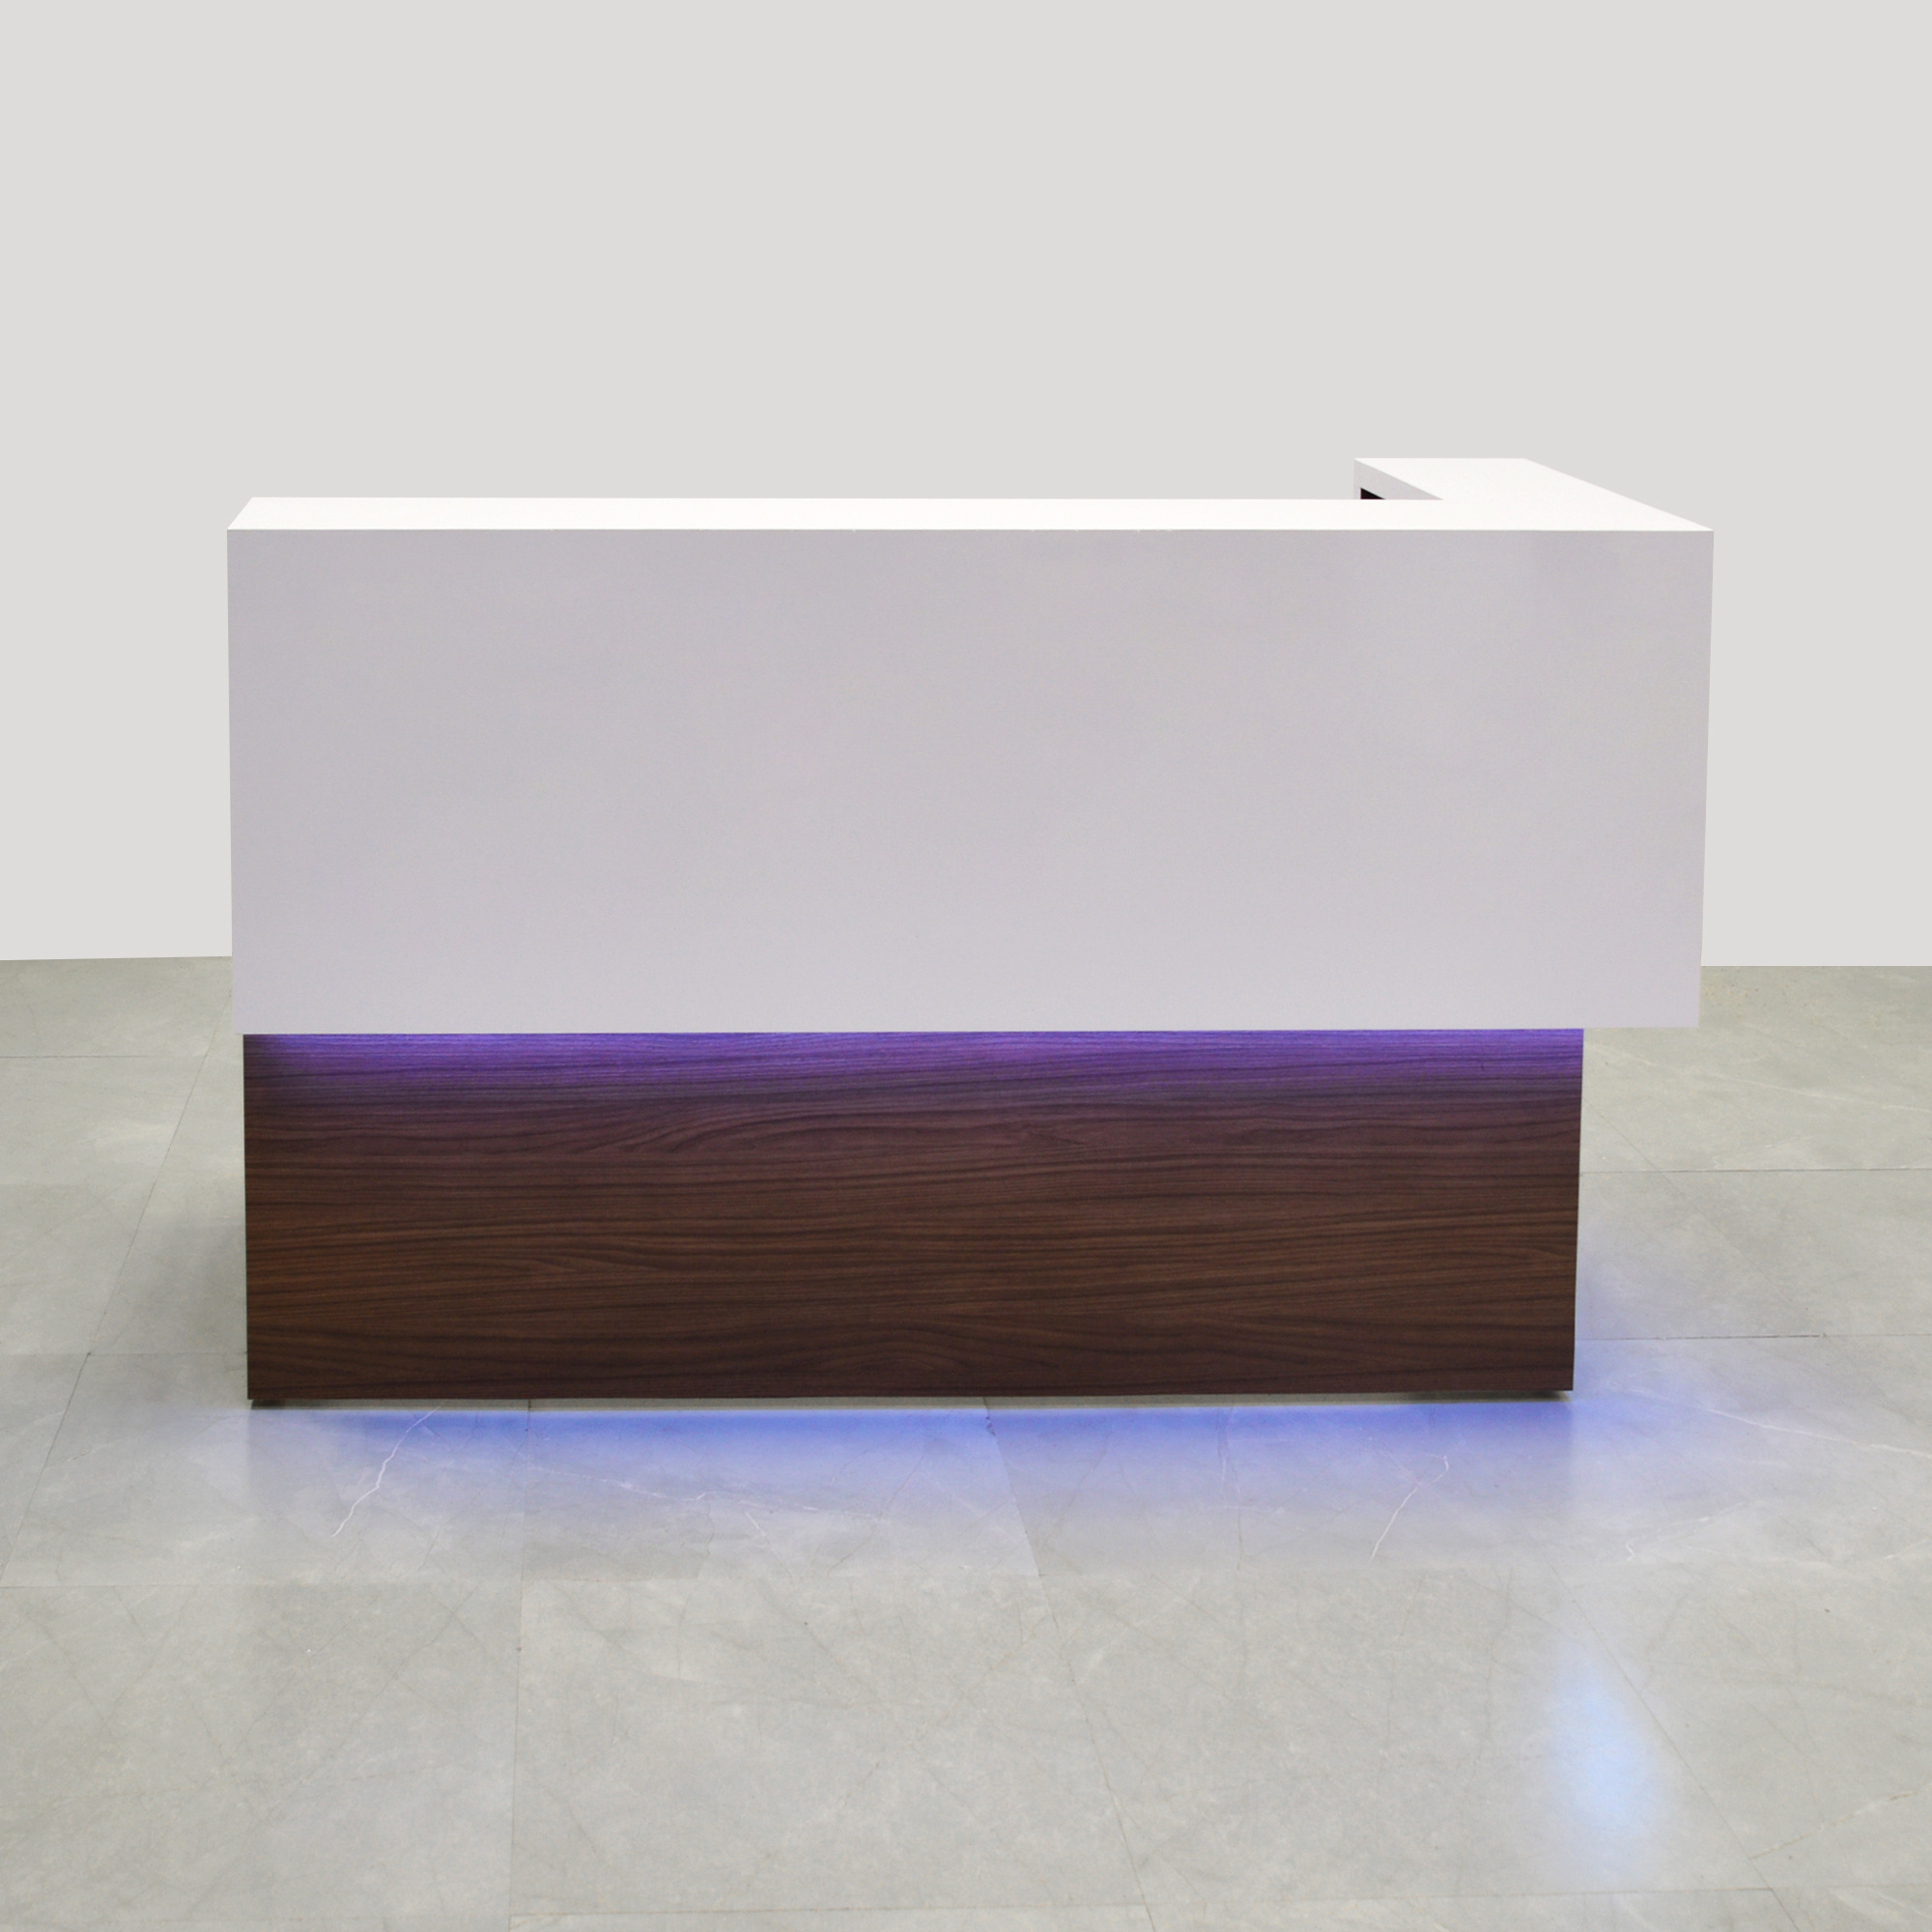 72-inch San Francisco L-Shape Reception Desk, right l-panel side when facing front in white matte laminate counter and walnut laminate desk, with color LED, shown here.